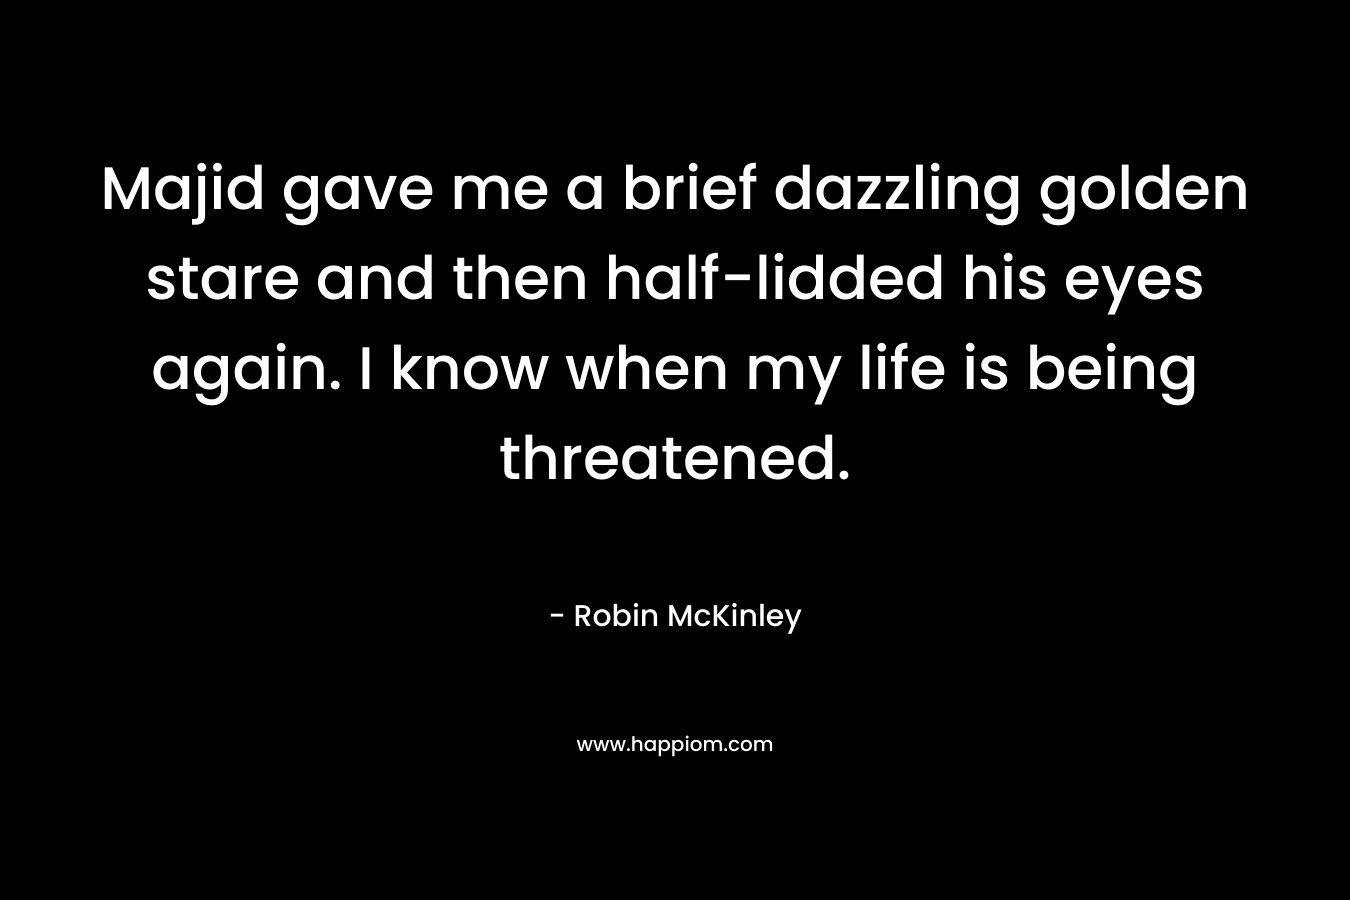 Majid gave me a brief dazzling golden stare and then half-lidded his eyes again. I know when my life is being threatened. – Robin McKinley